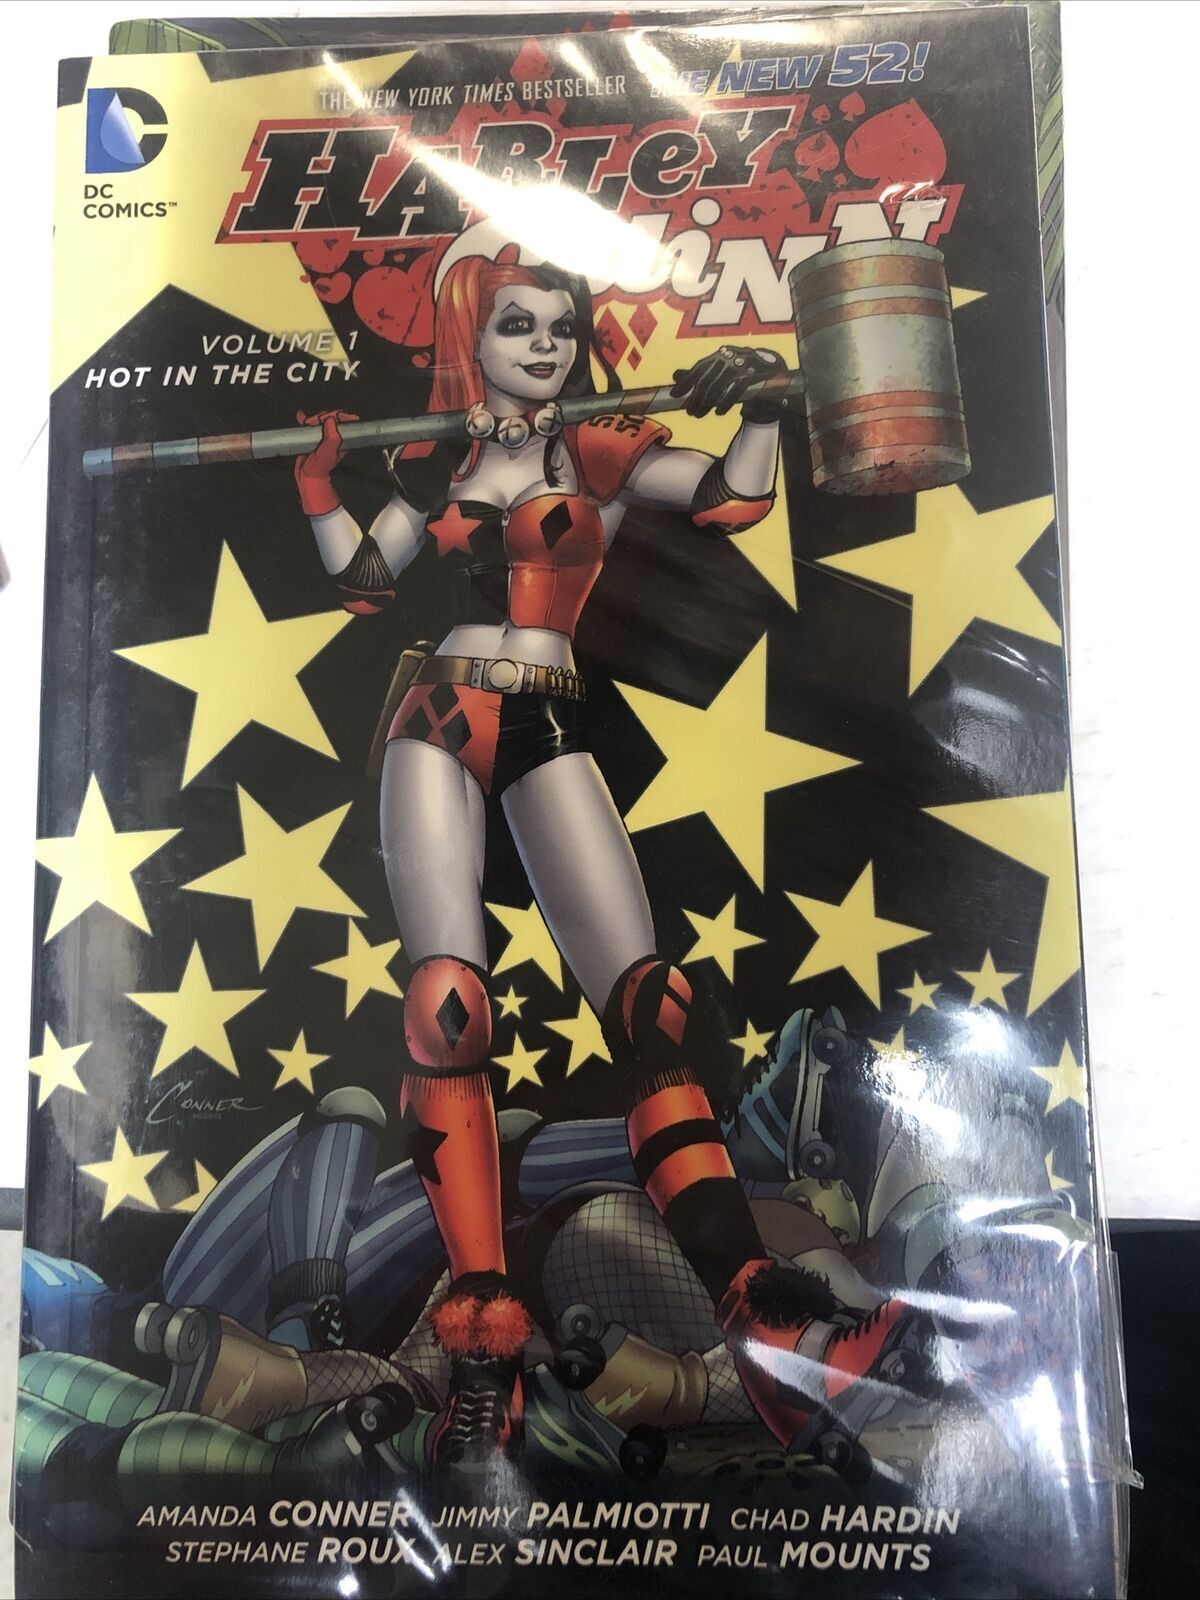 Harley Quinn Vol. 1: Hot in the City (The New 52) [Book]